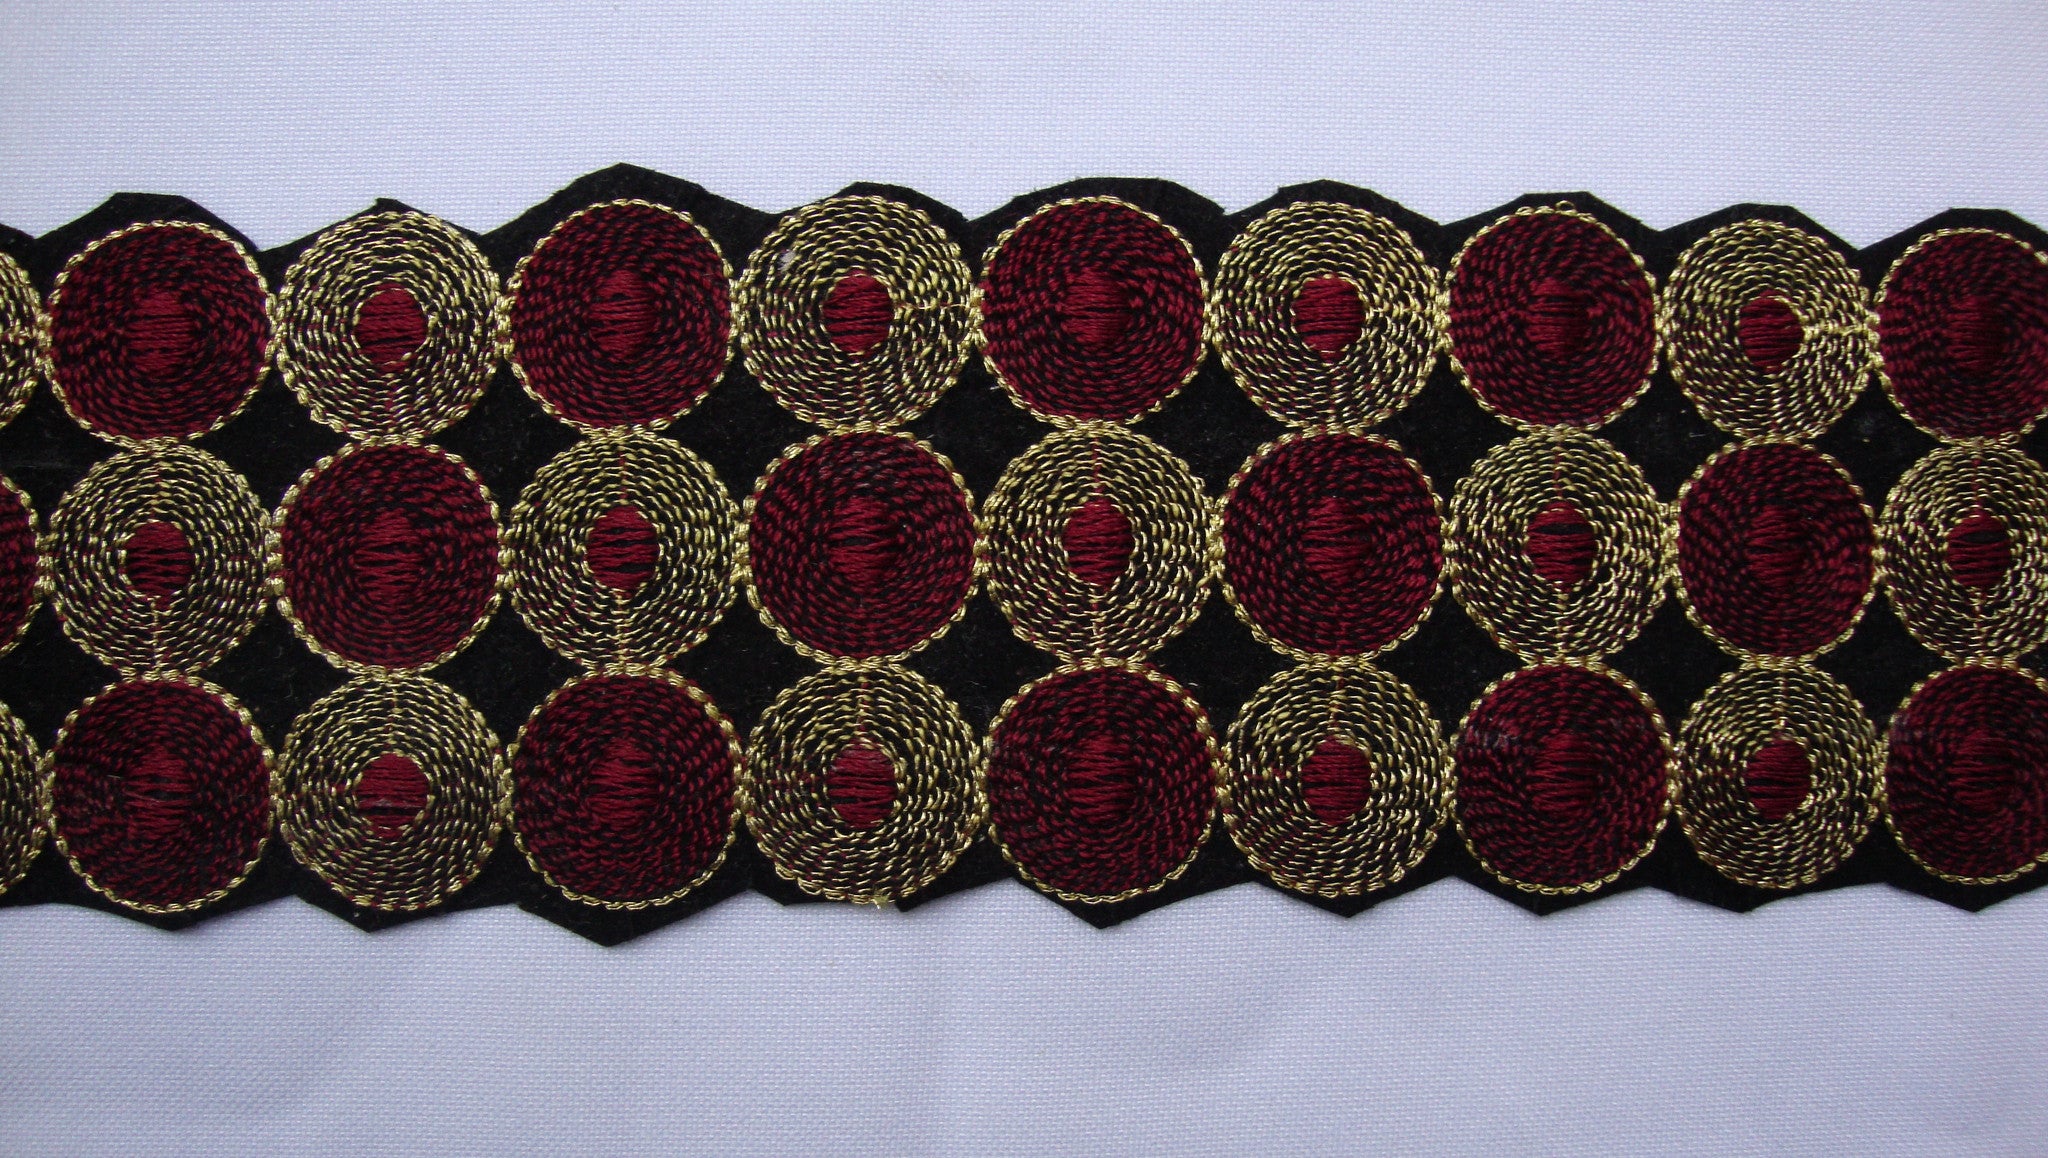 Burgundy & Gold Embroidered Trimming (Sold as a 2 yard piece)